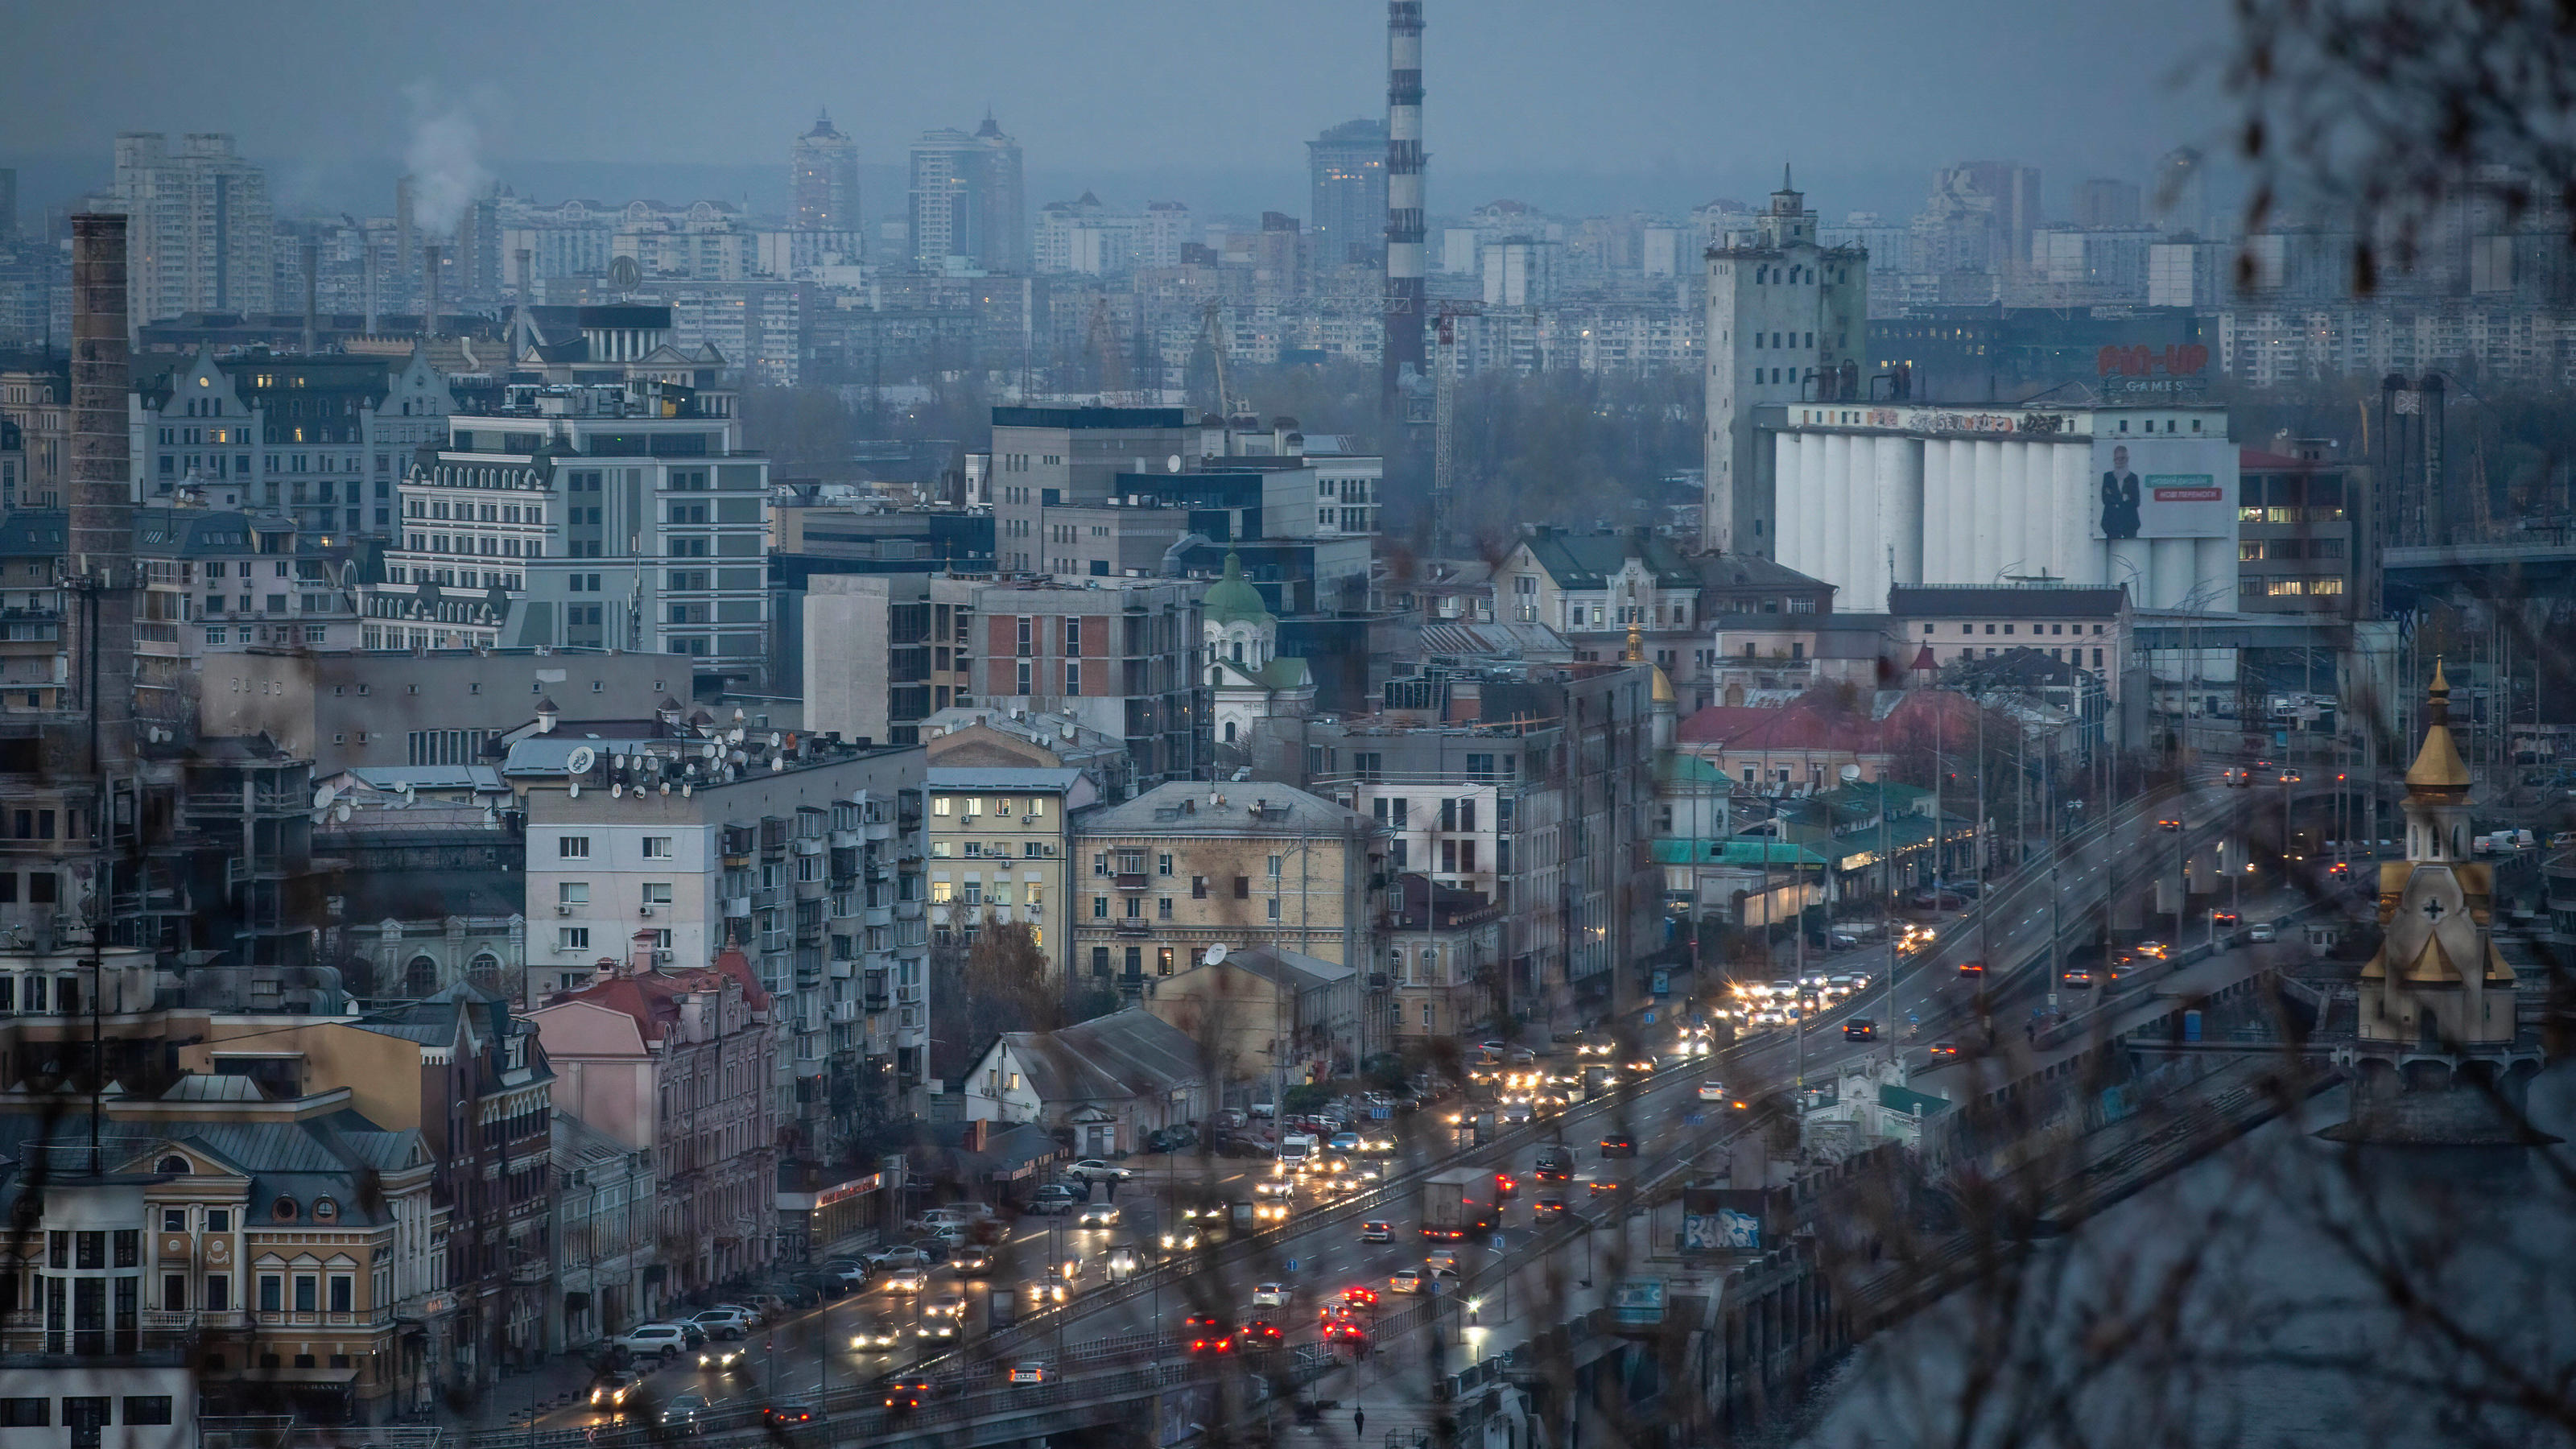  November 7, 2022, Kyiv, Ukraine: Central Kyiv without electricity after critical civil infrastructure was hit by Russian missile attacks in Ukraine. Kyiv authorities are planning to evacuate three million residents if the Ukrainian capital suffers a